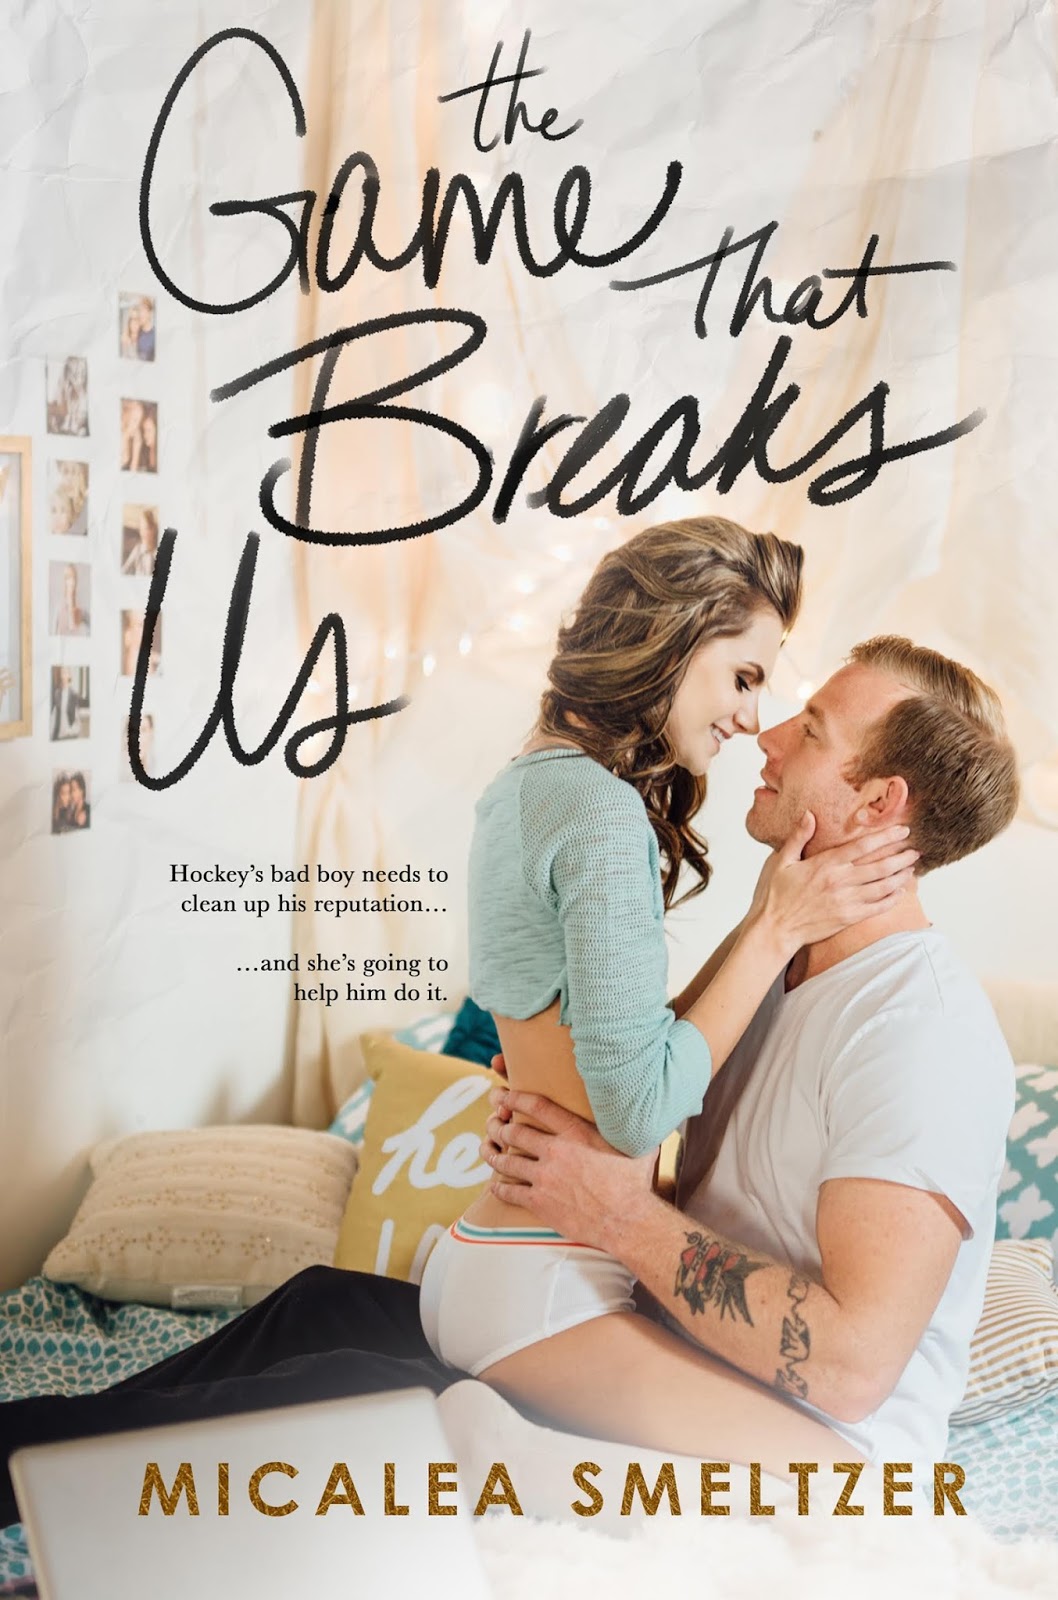 Category The-game-that-breaks-us-by-mecalea-smeltzer-blog-tour pic